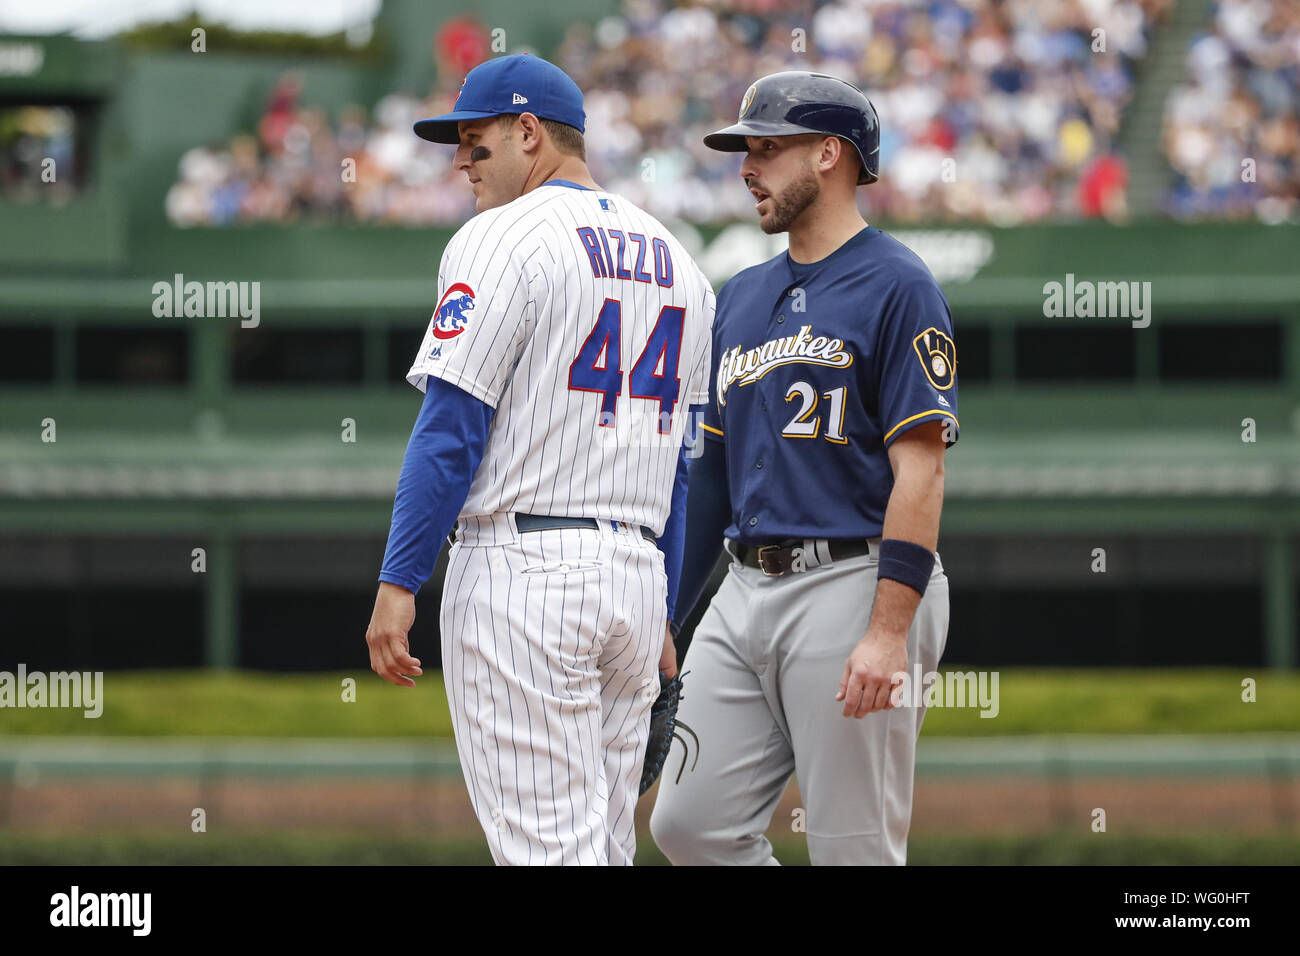 Chicago, USA. 31st Aug, 2019. Chicago Cubs first baseman Anthony Rizzo (44) chats with Milwaukee Brewers infielder Travis Shaw (21) in the sixth inning at Wrigley Field on Saturday, August 31, 2019 in Chicago. Credit: UPI/Alamy Live News Stock Photo